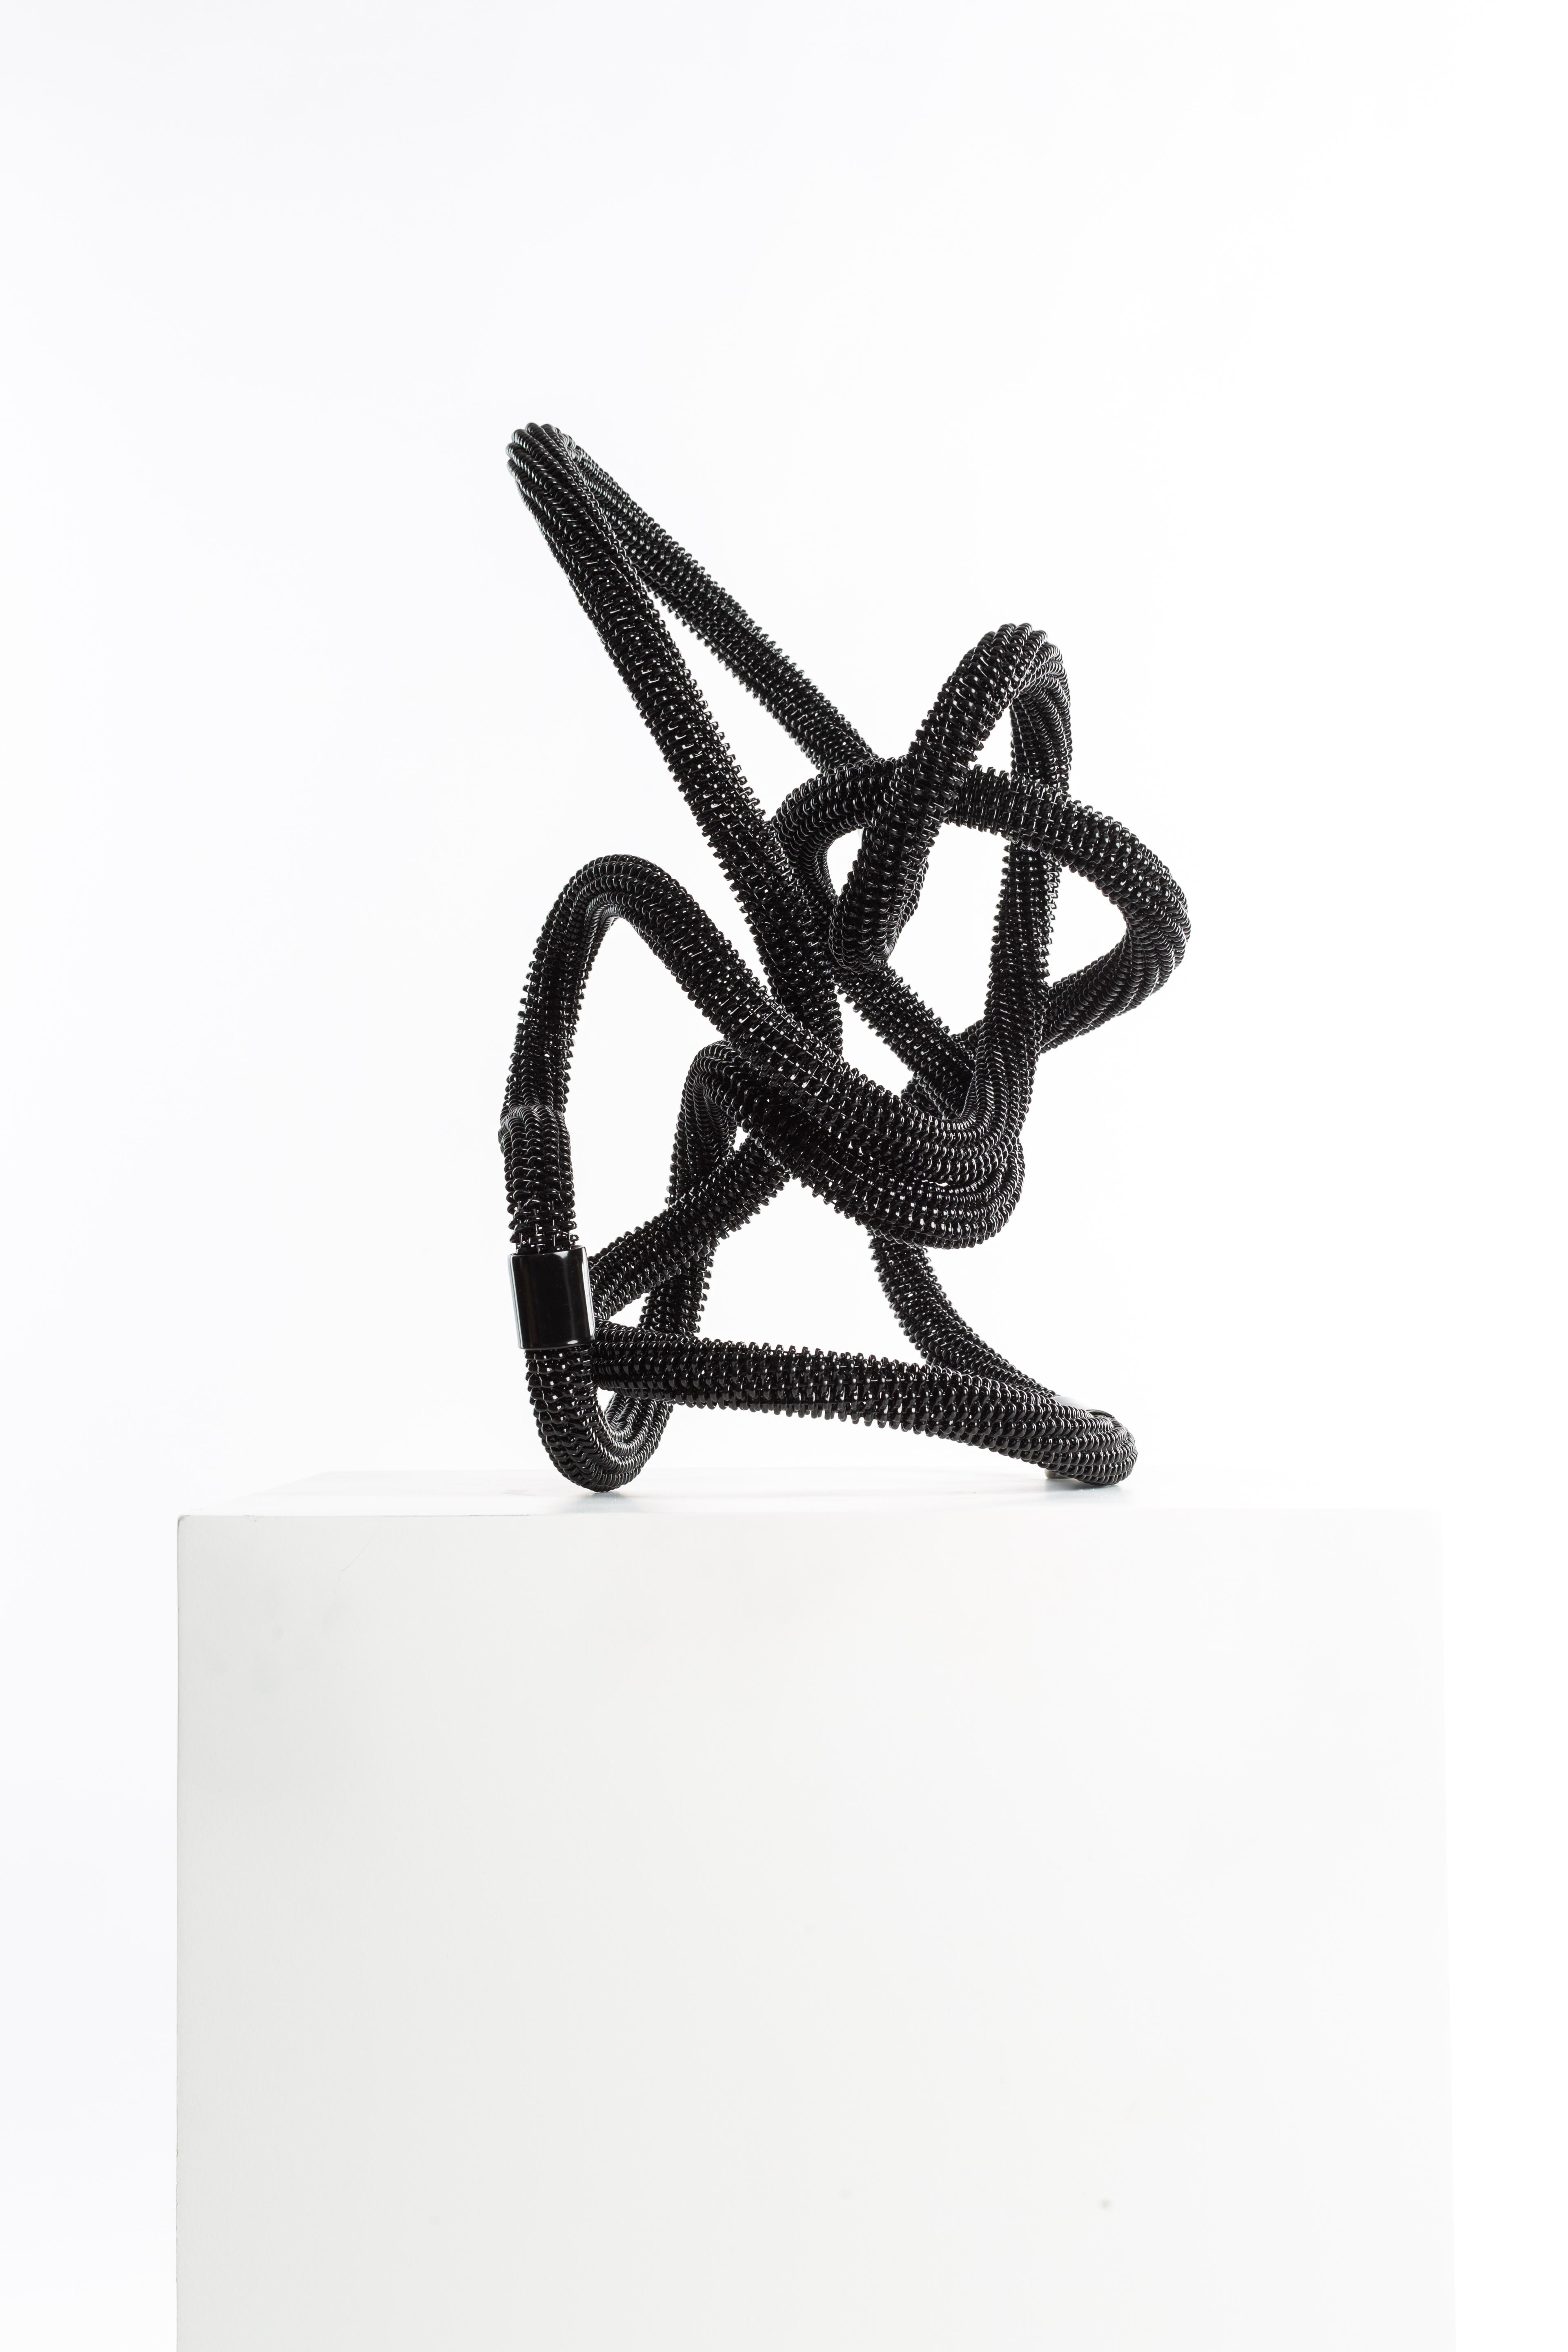 Compact Whisp 005
Black
1/1
Stainless Steel, Powder Coating
59cm x 36cm x 43cm
6Kg
2021

Whisps are meticulously constructed organic sculptural expressions. These expressions are symbolic of what the mind feels like to artist Driaan Claassen as he